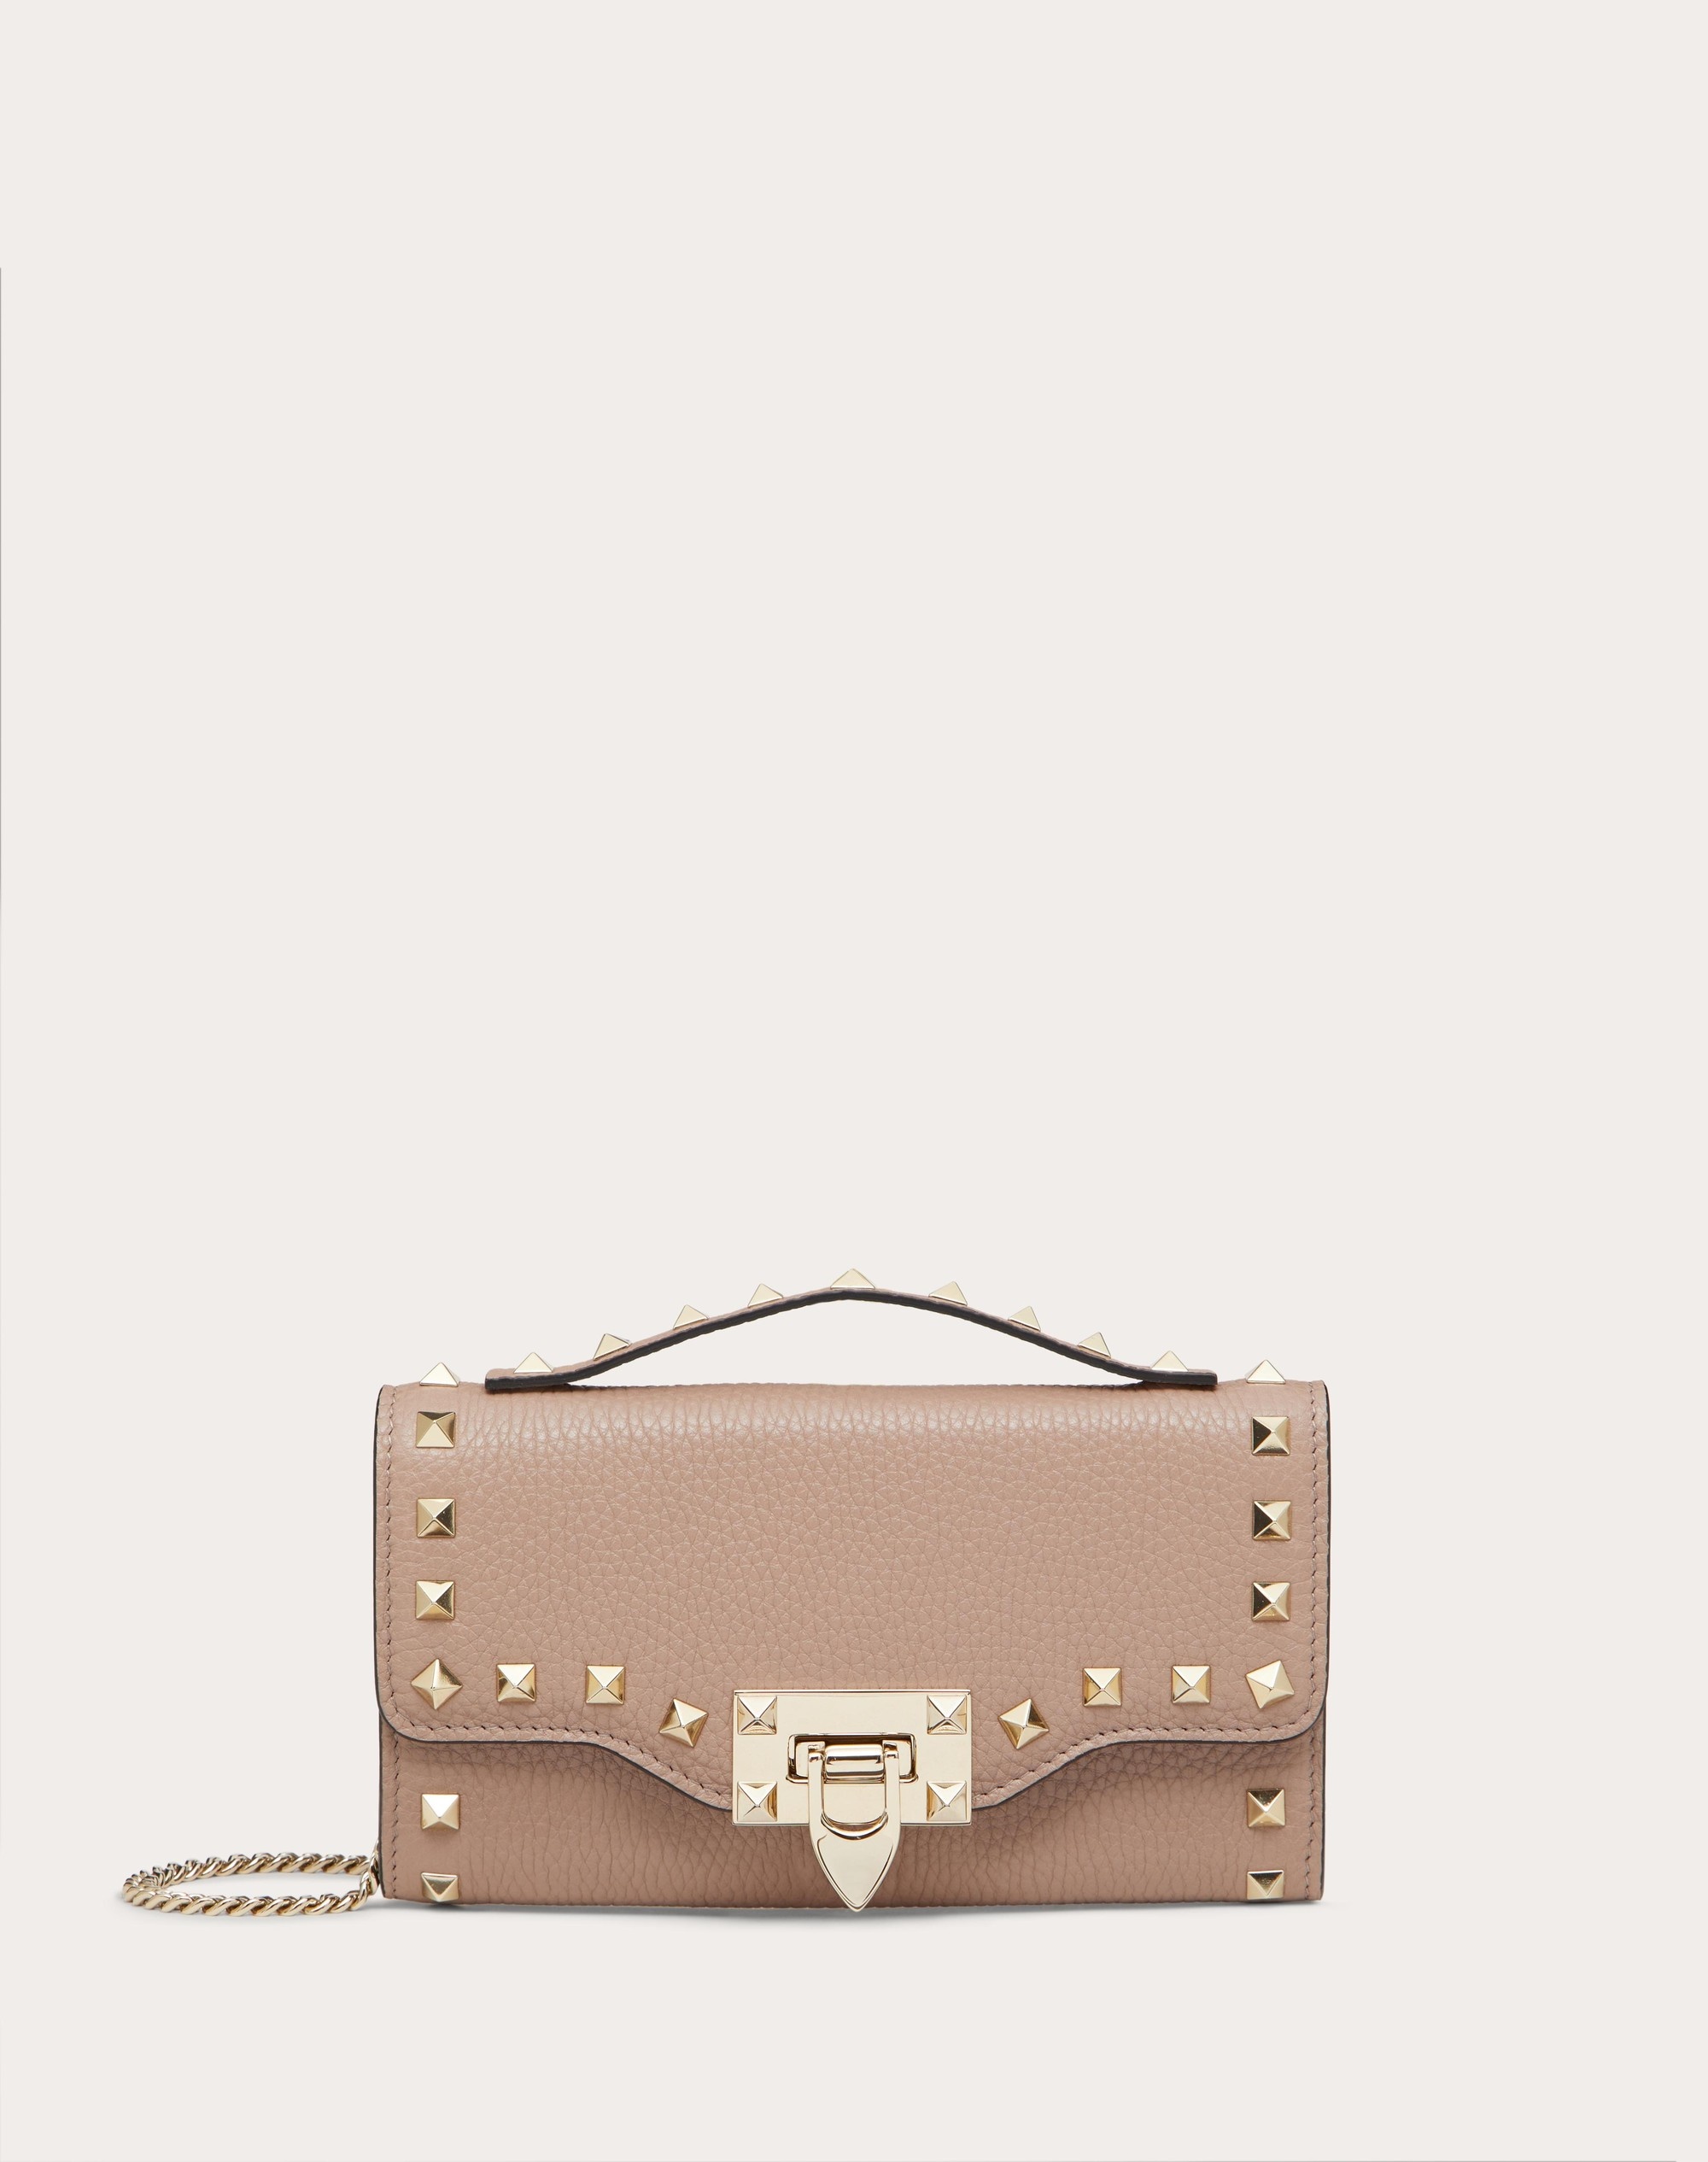 ROCKSTUD GRAINY CALFSKIN WALLET WITH CHAIN STRAP - 1